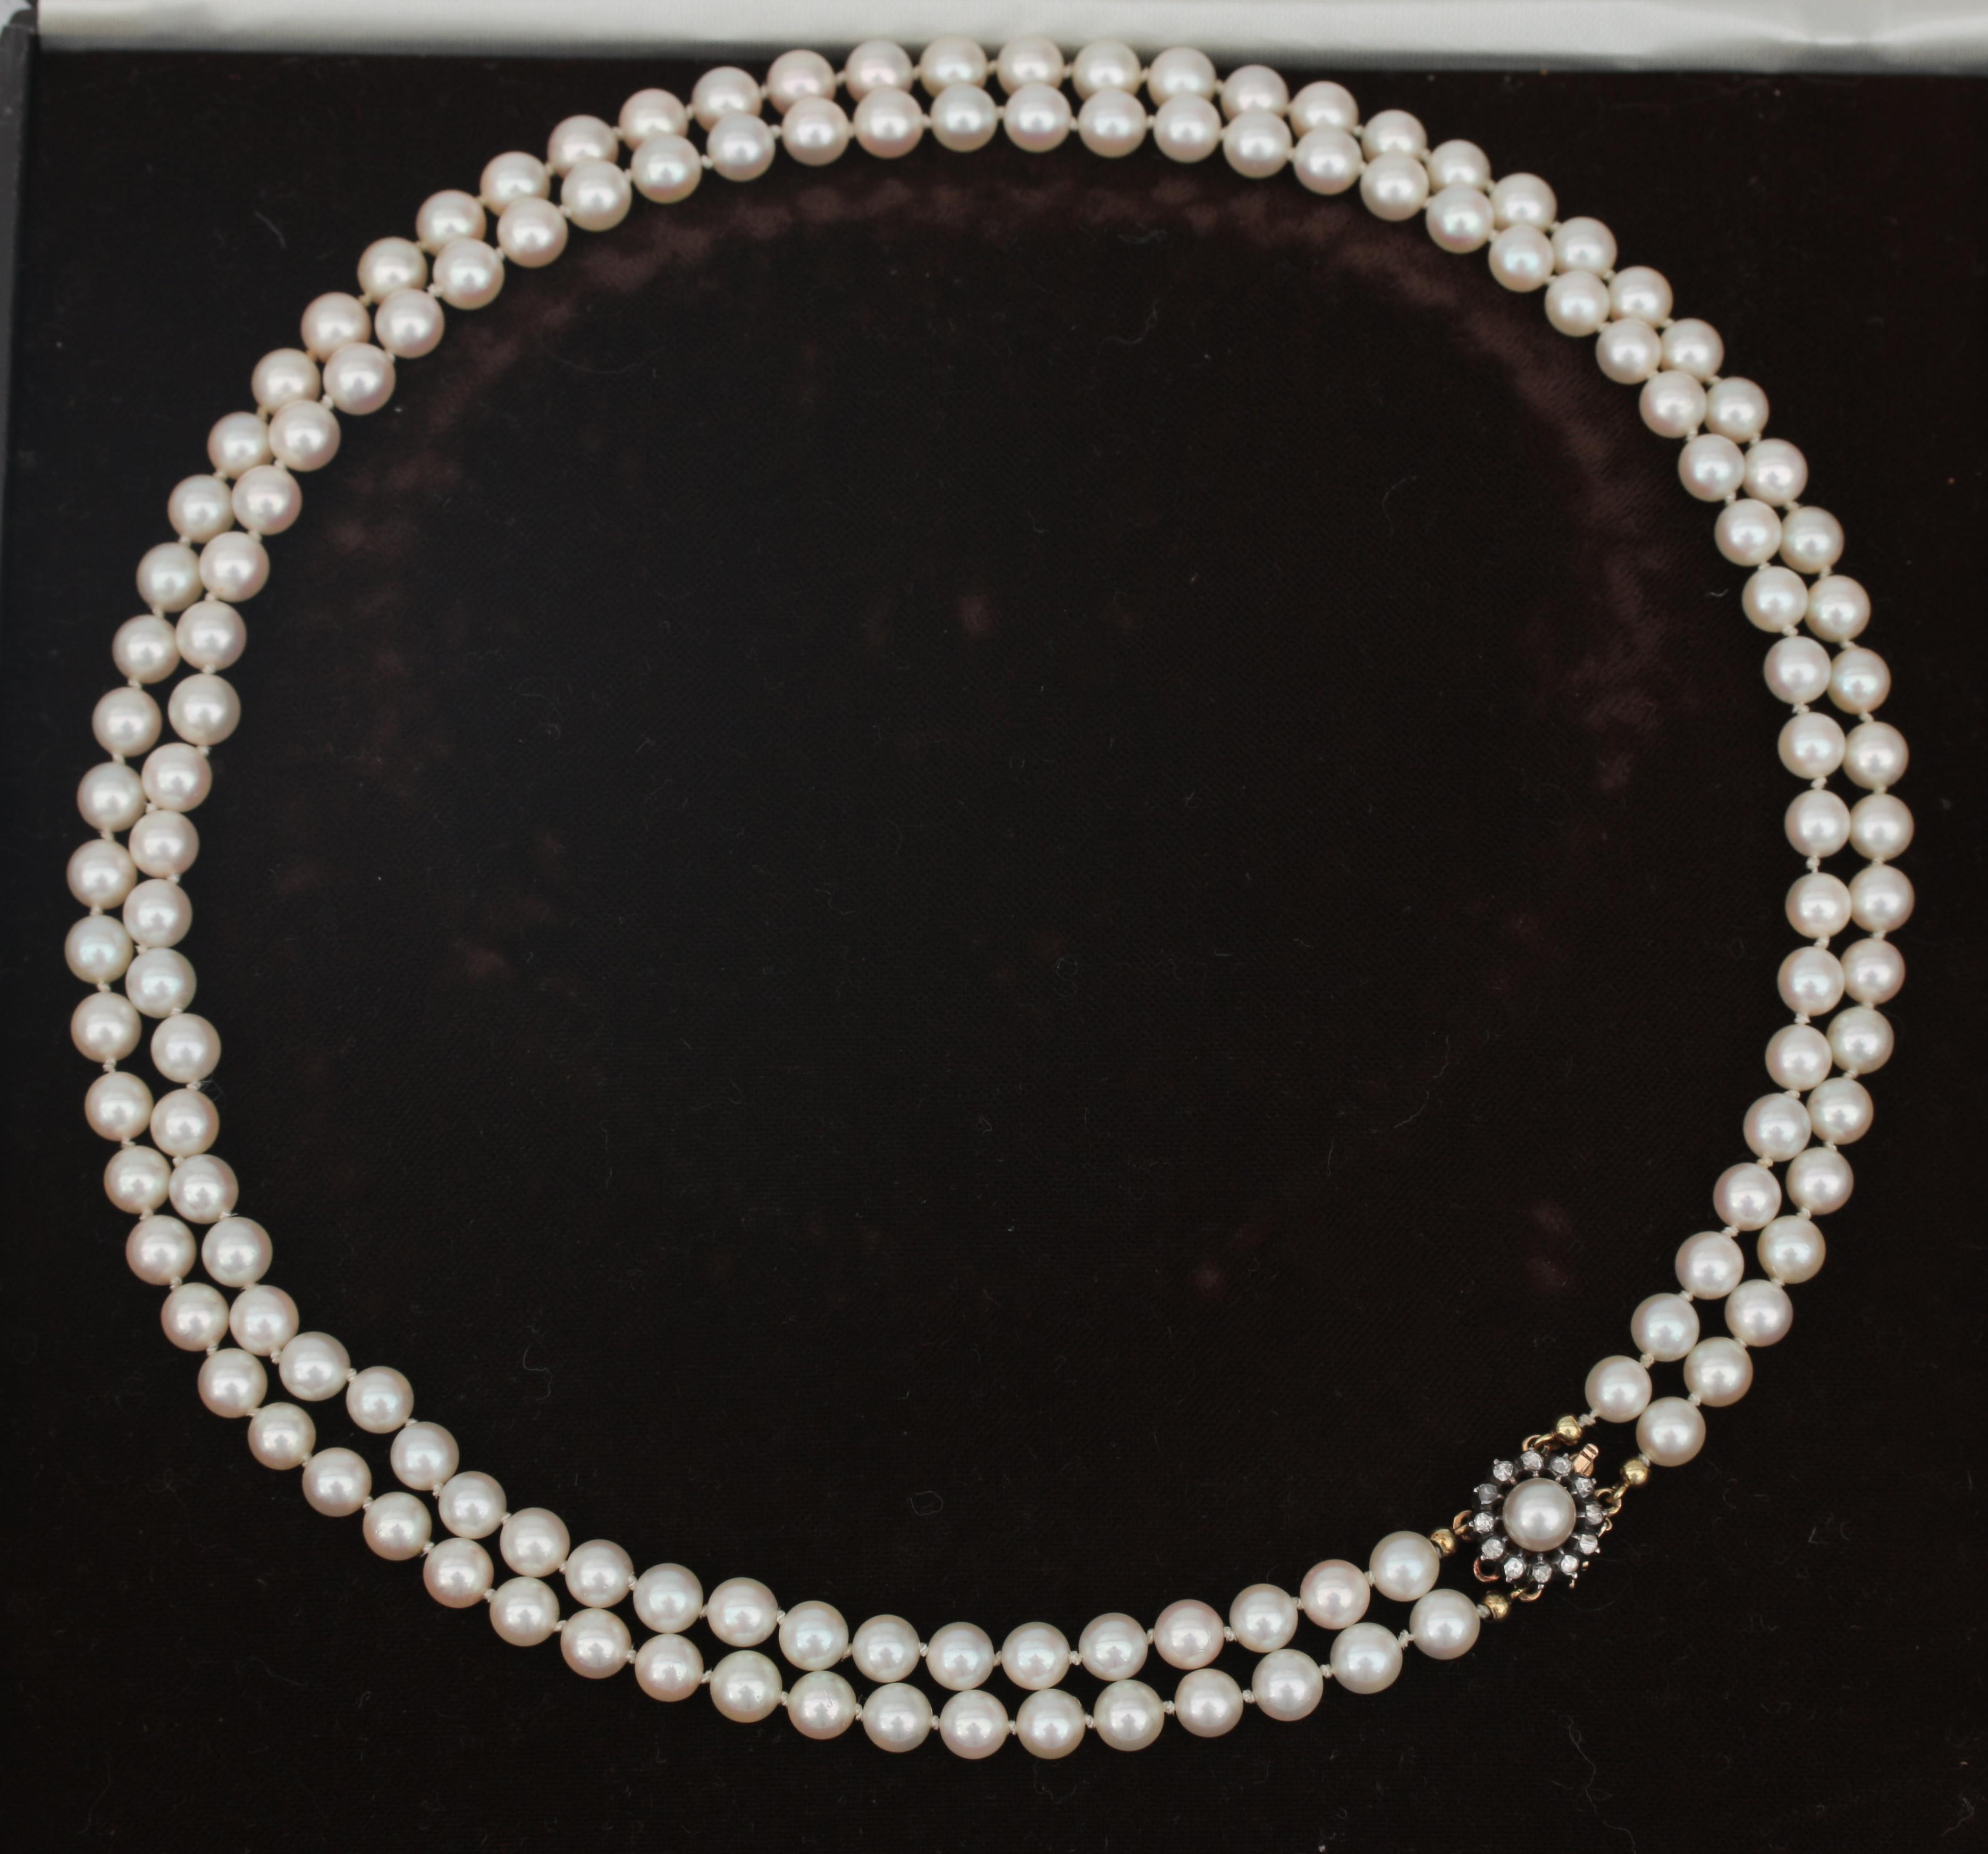 A cultured Akoya pearl necklace to a rose cut diamond clasp